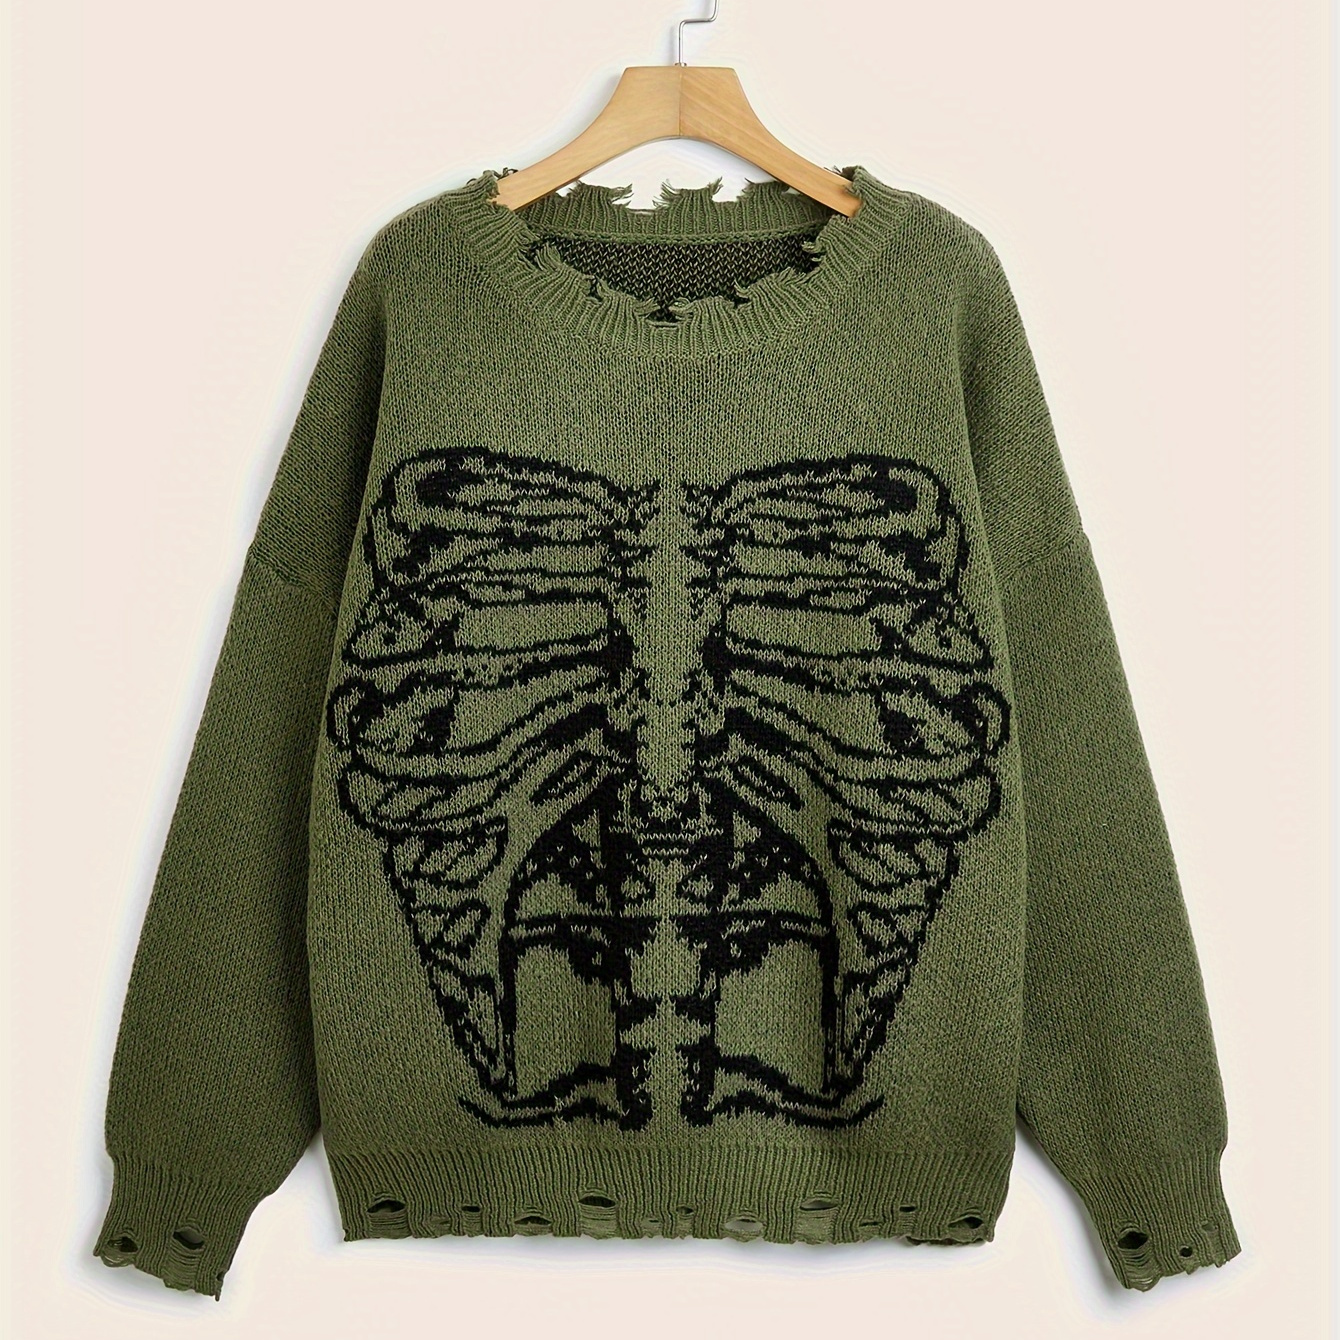 

Plus Size Goth Sweater, Women's Plus Skeleton Print Ripped Long Sleeve Round Neck Sweater